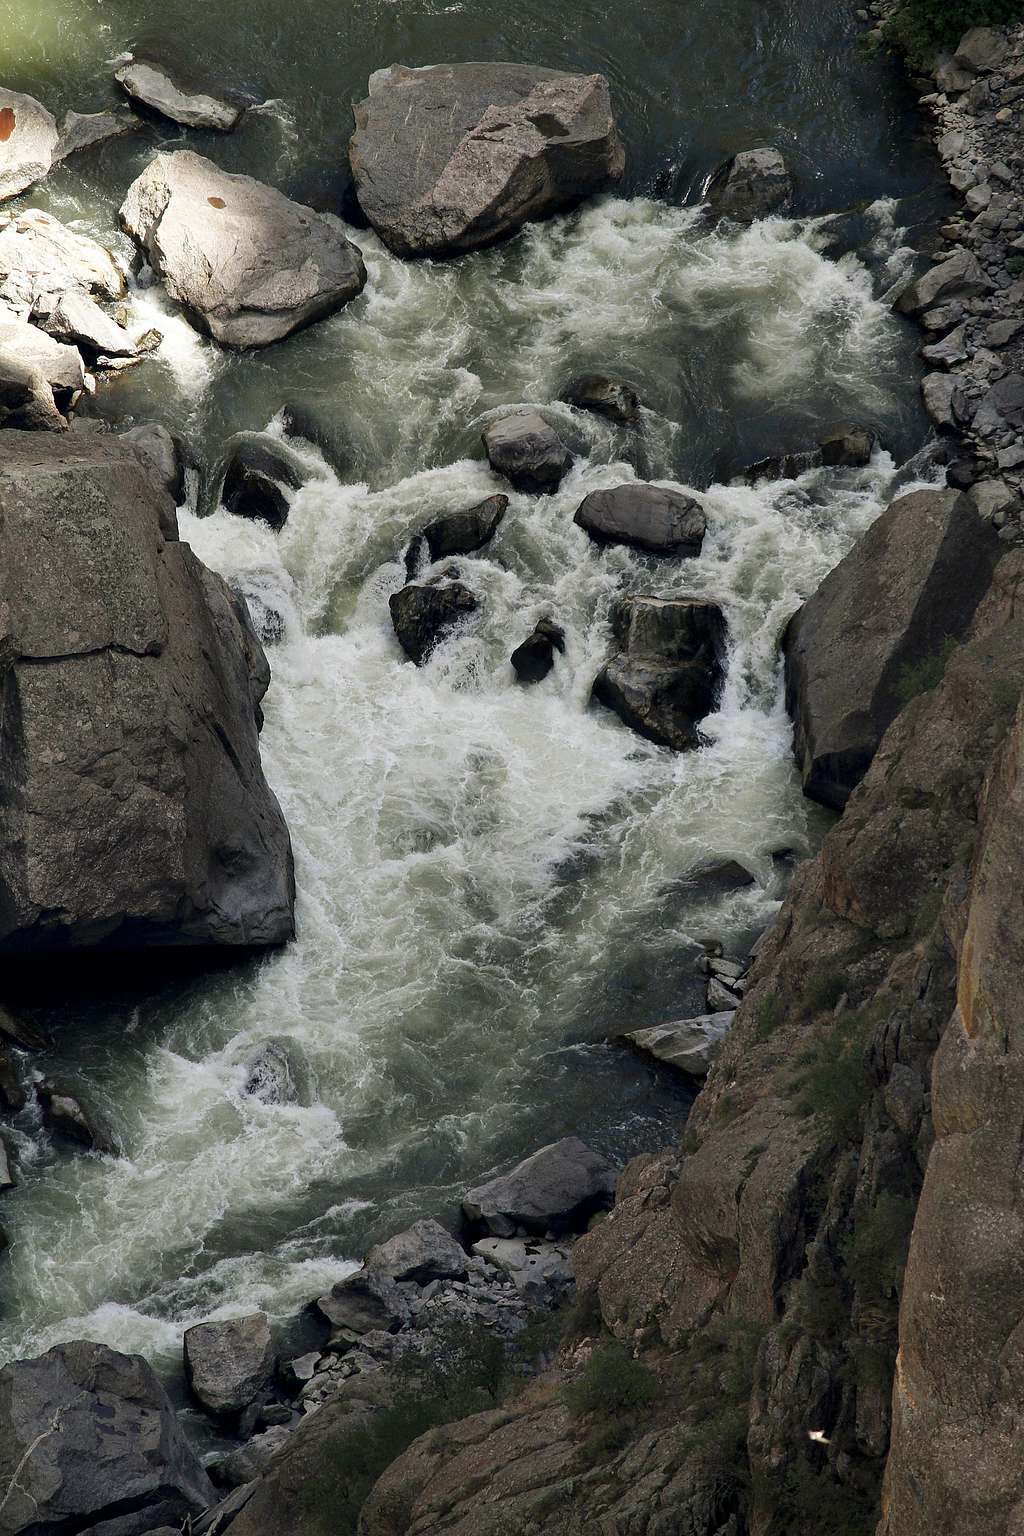 Rough Waters in Black Canyon of the Gunnison